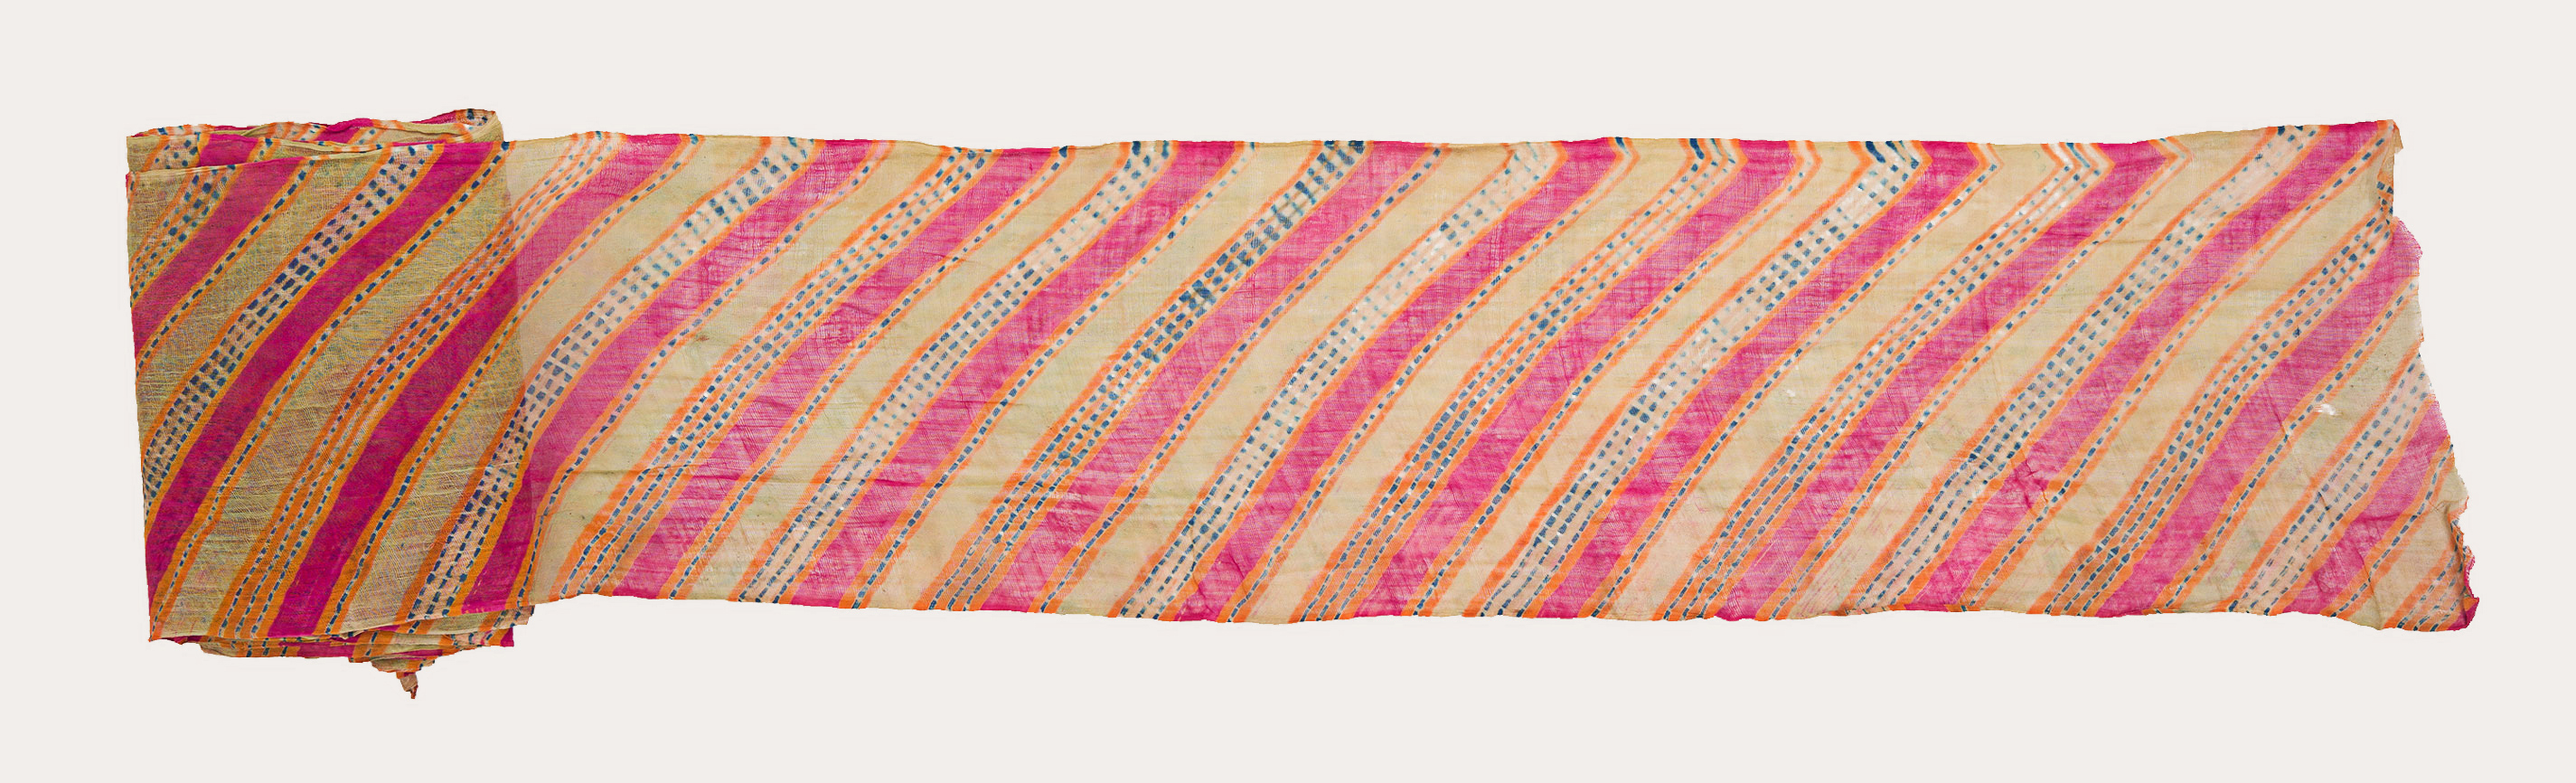 A long piece of rectangular cloth rolled from the right side. The left side shows us the narrow cloth with symmetrically spaced diagonal stripes.